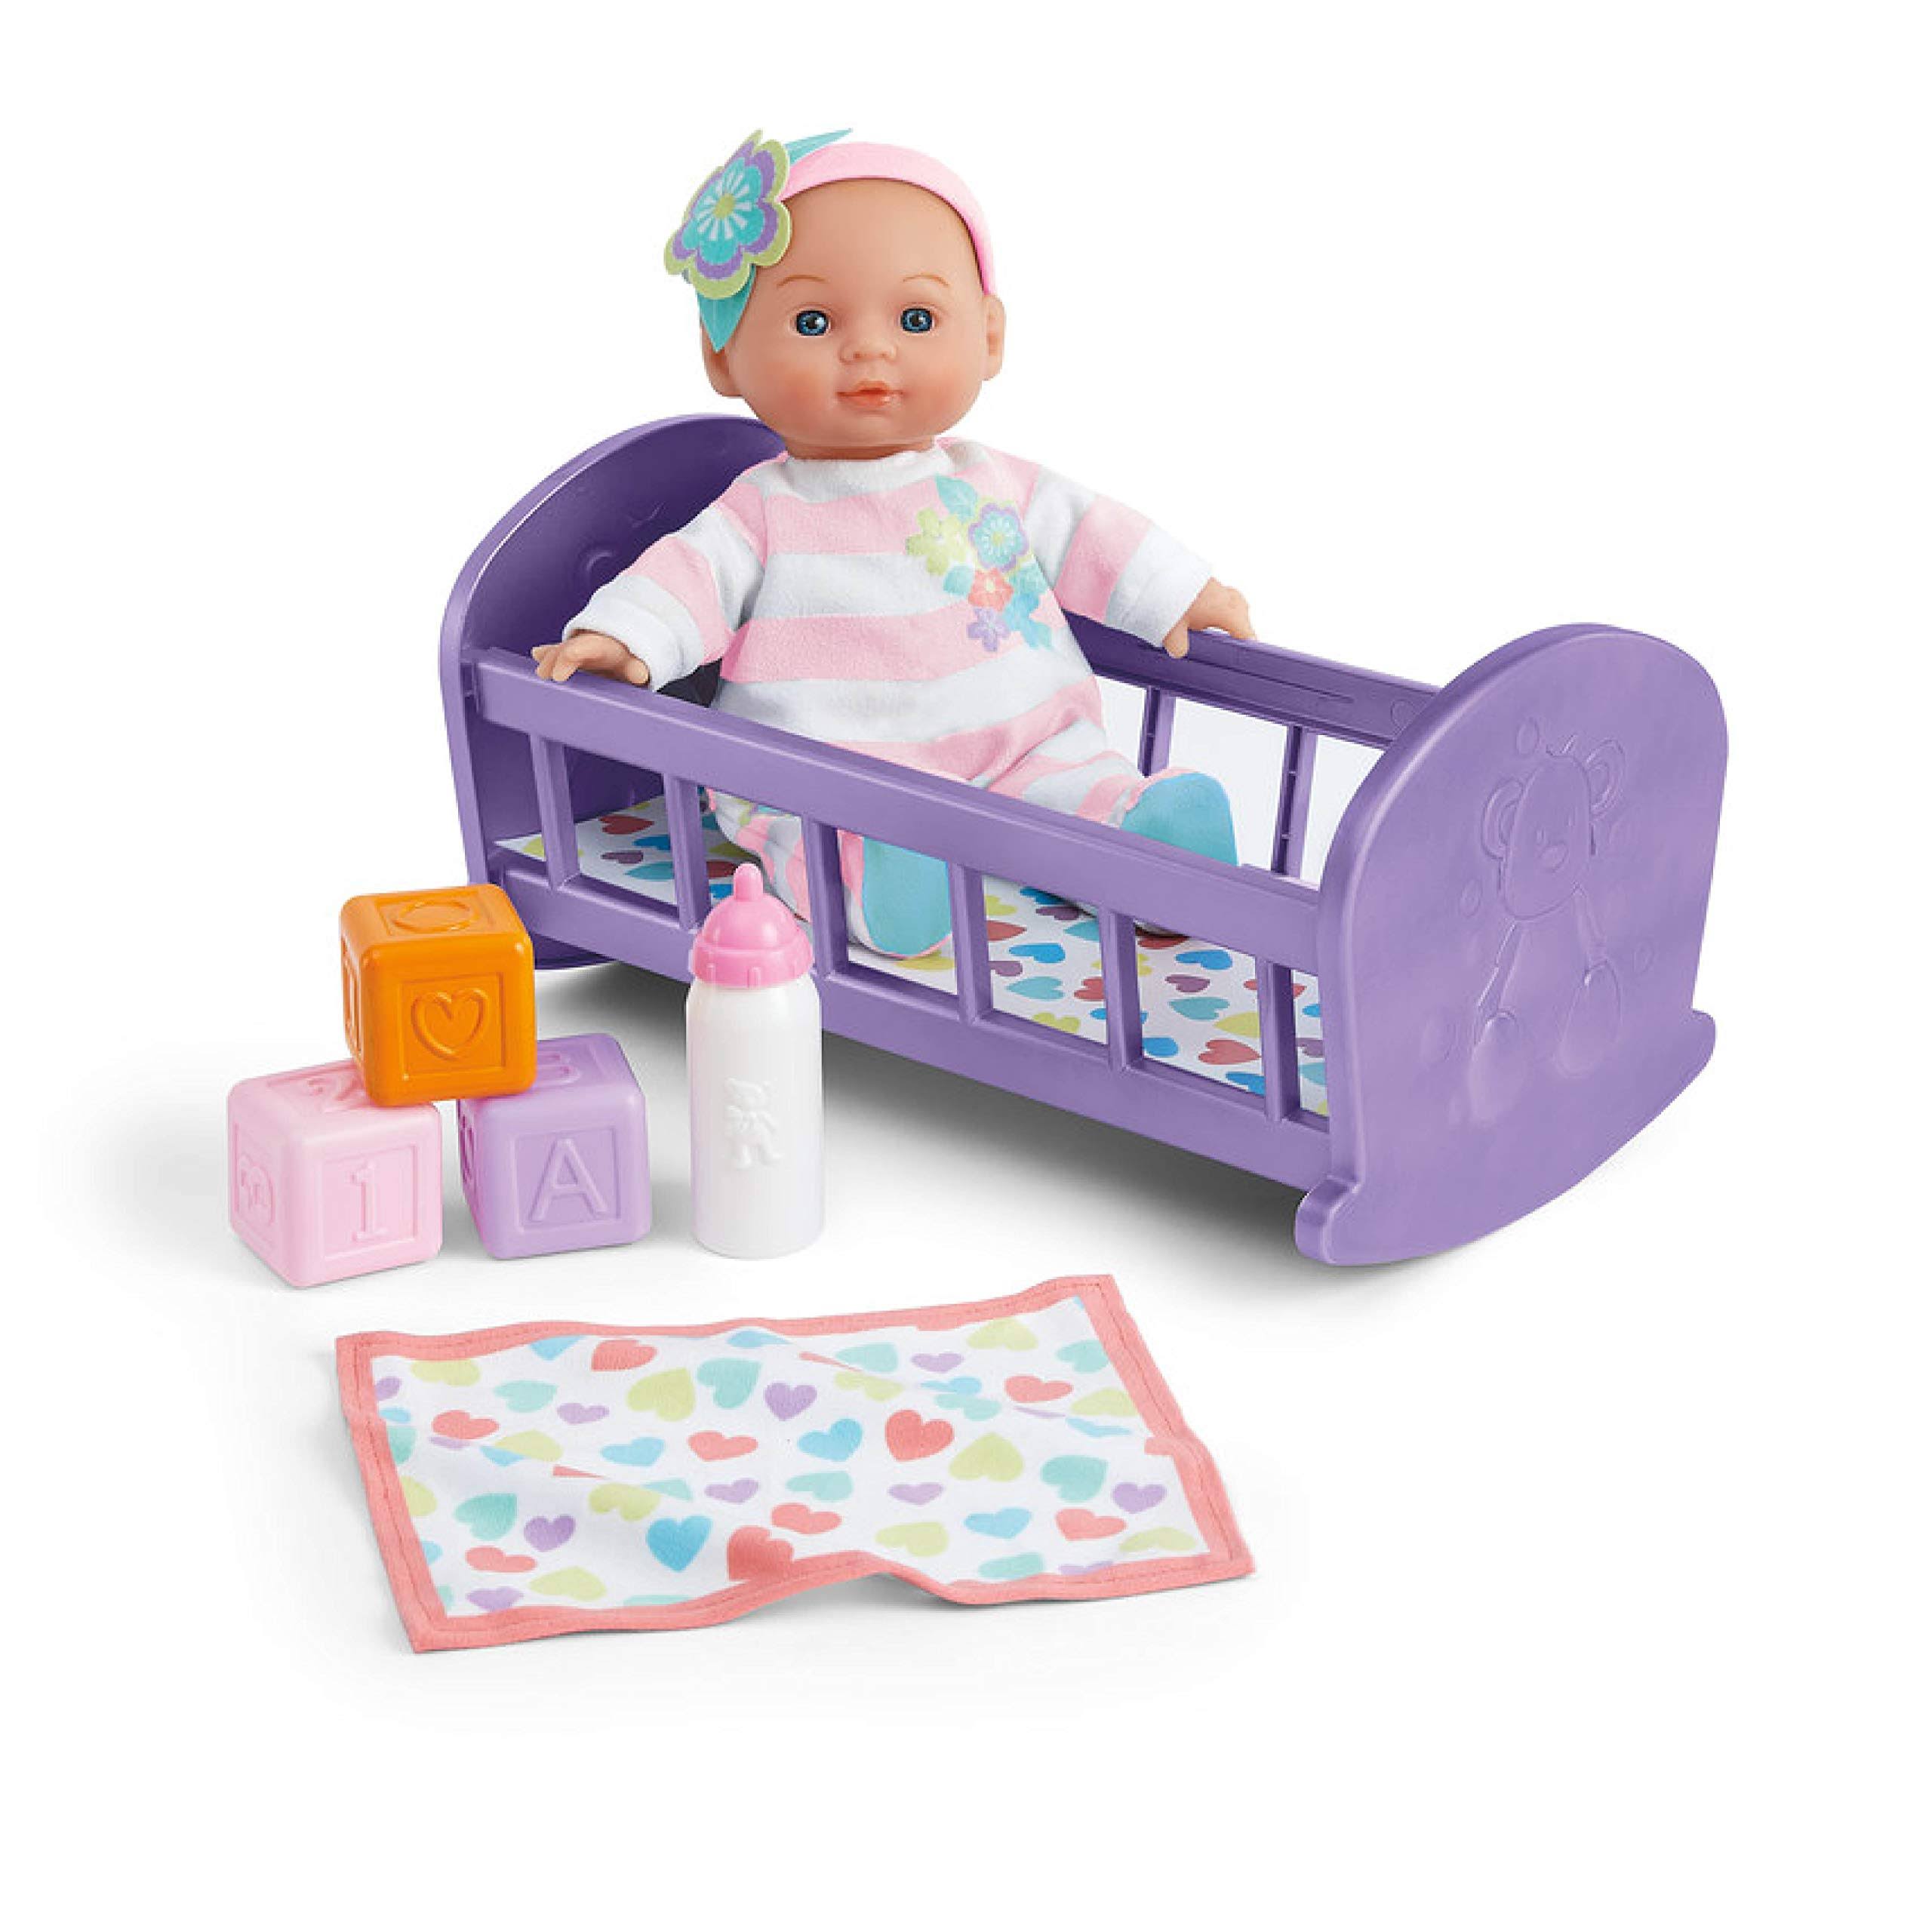 Kidoozie Lullaby Baby Playset - Soft Body Doll and Crib For Children A